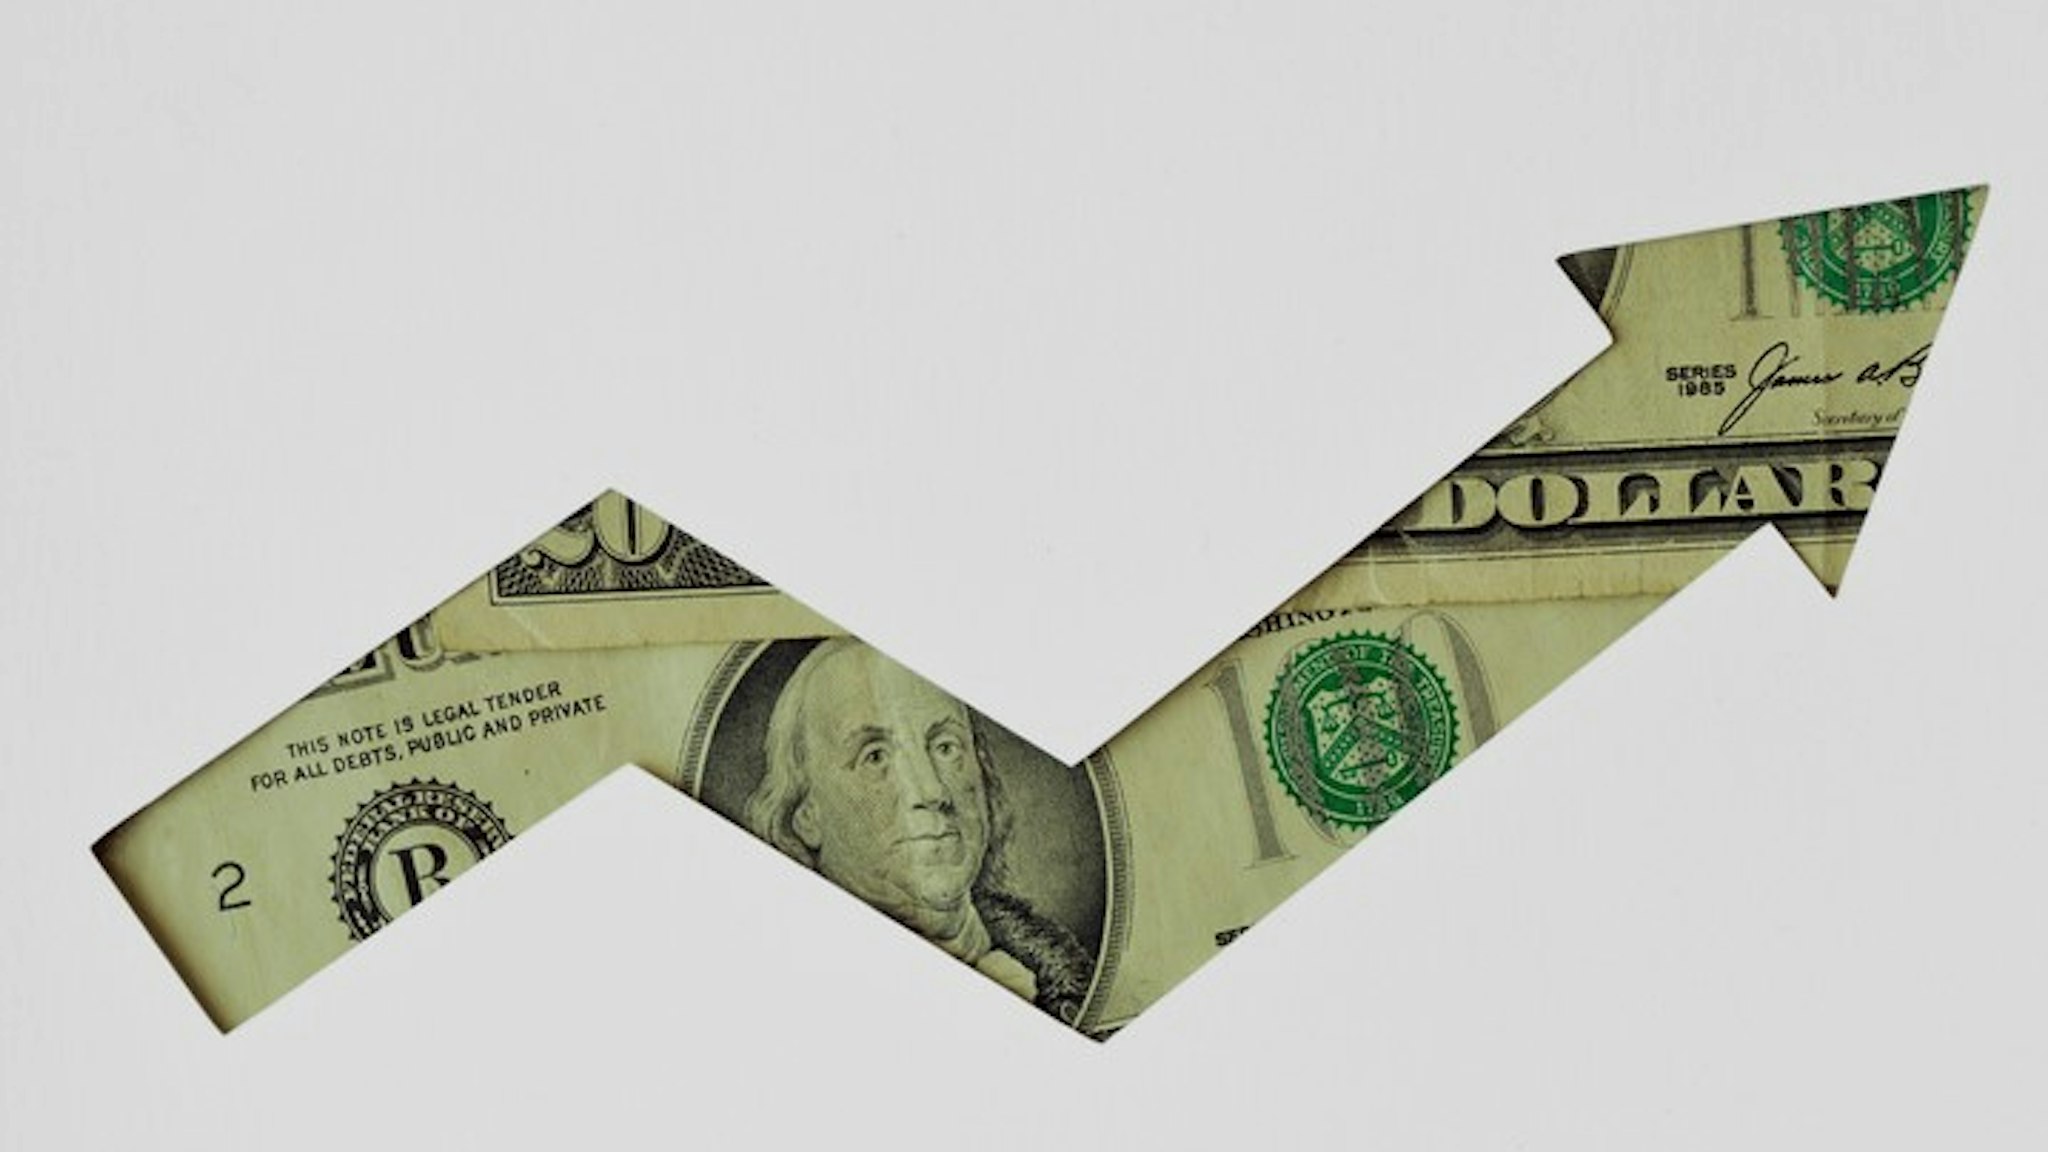 Upward arrow made of dollar banknotes on white background - Concept of upward trend of dollar currency